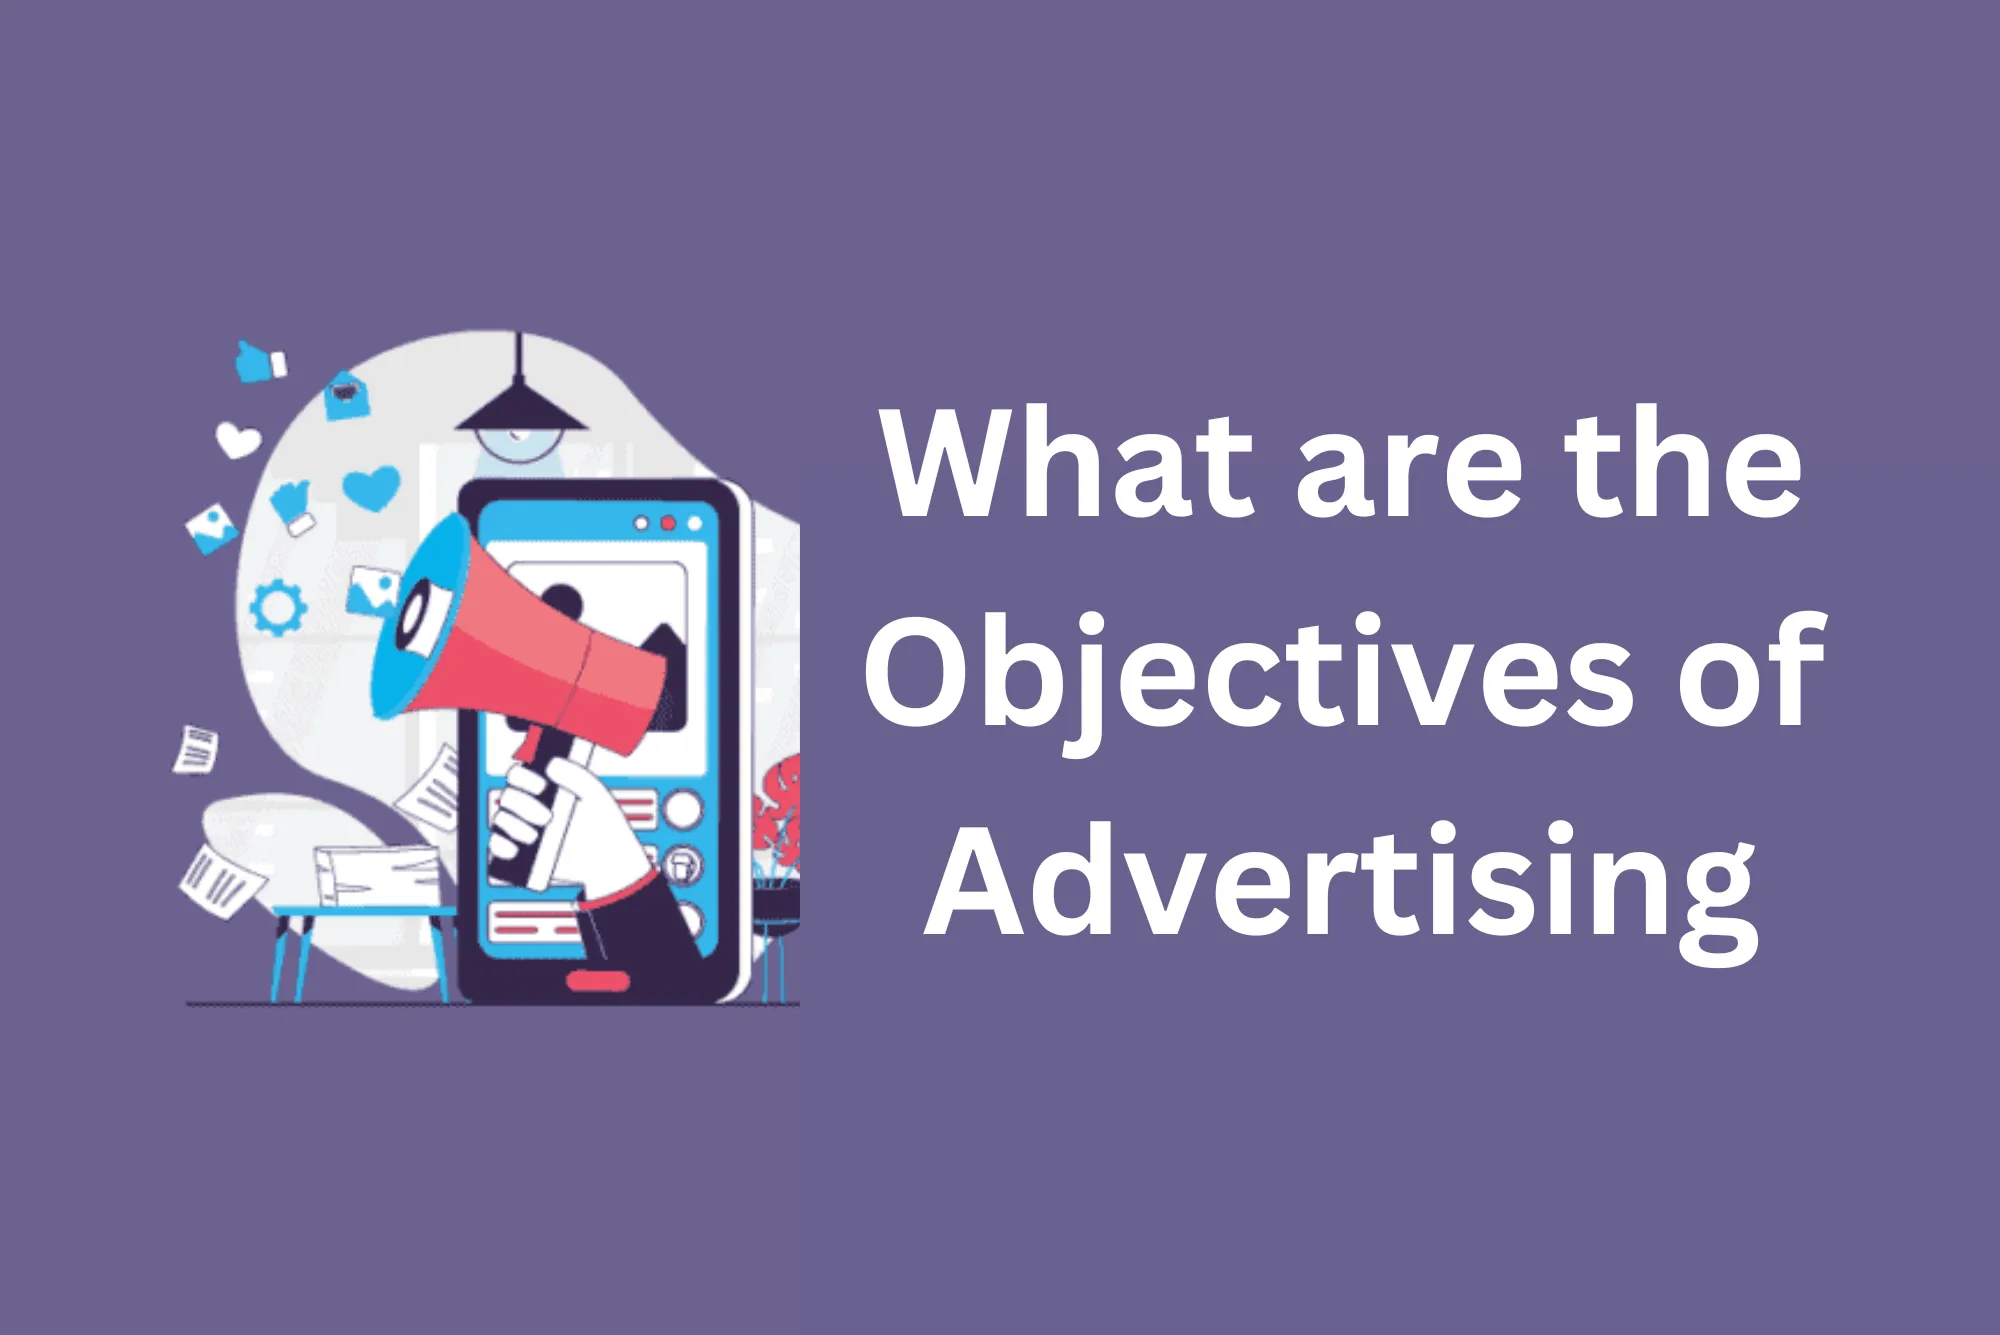 What are the Objectives of Advertising